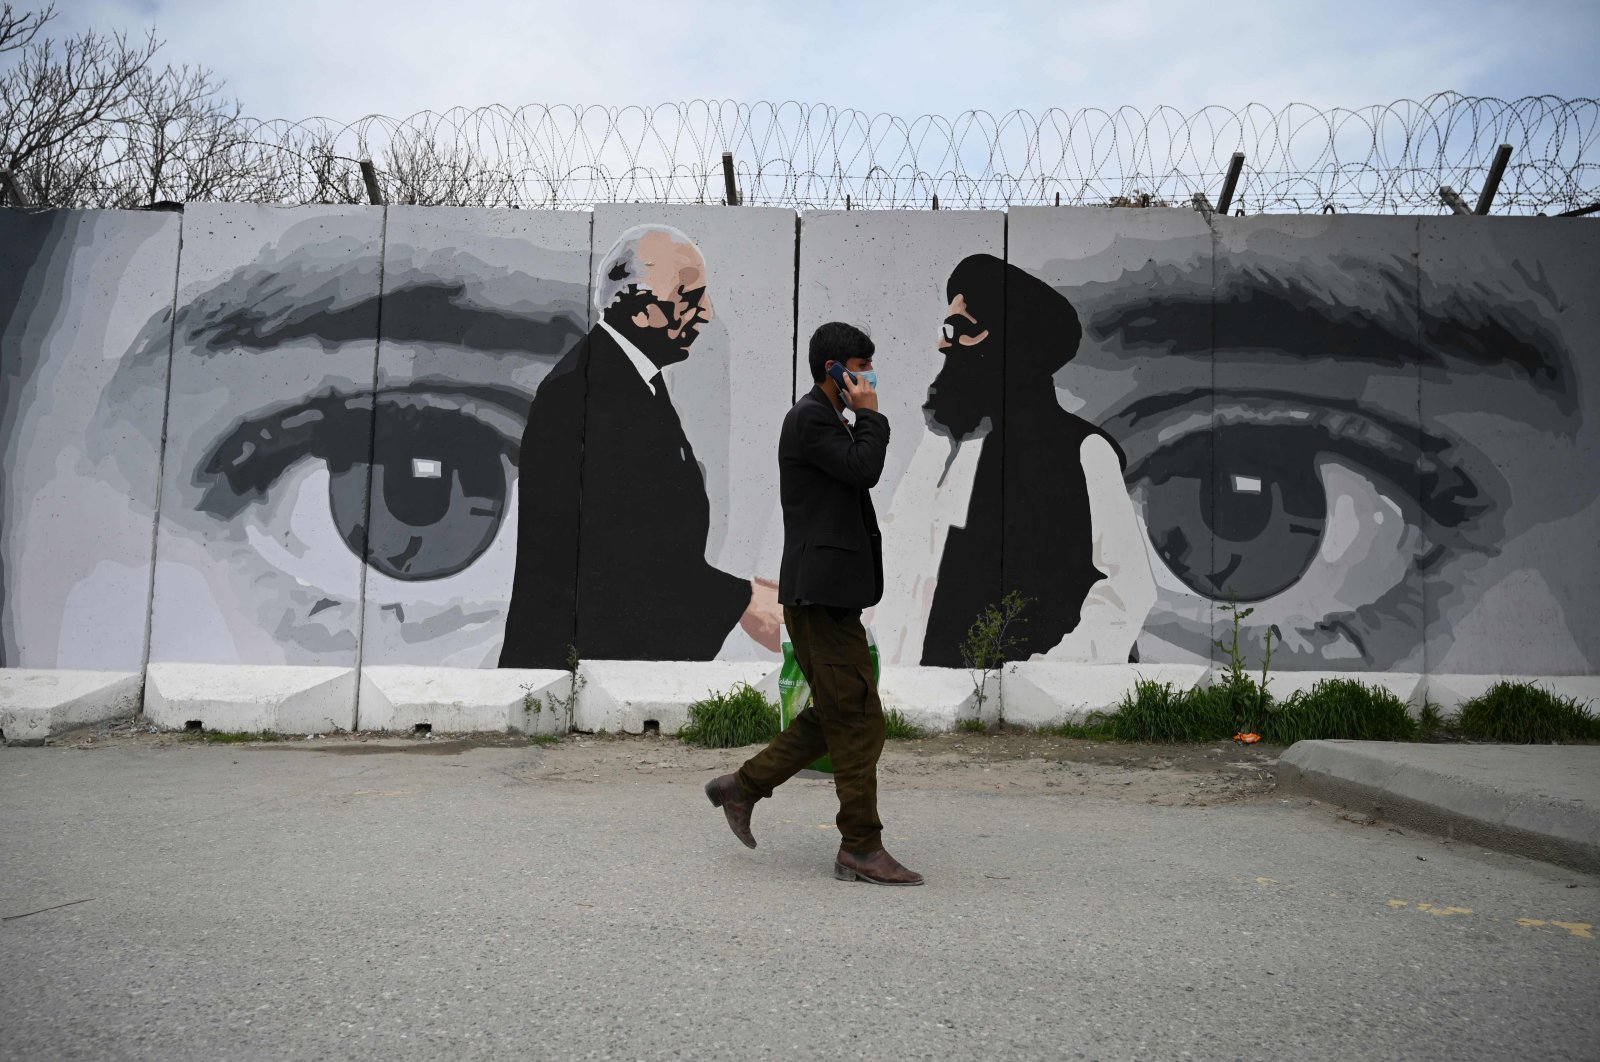 A man wearing a face mask walks past a wall painted with images of U.S. Special Representative for Afghanistan Reconciliation Zalmay Khalilzad (L) and Taliban co-founder Mullah Abdul Ghani Baradar (R), in Kabul, Sunday, April 5, 2020. (AFP Photo)